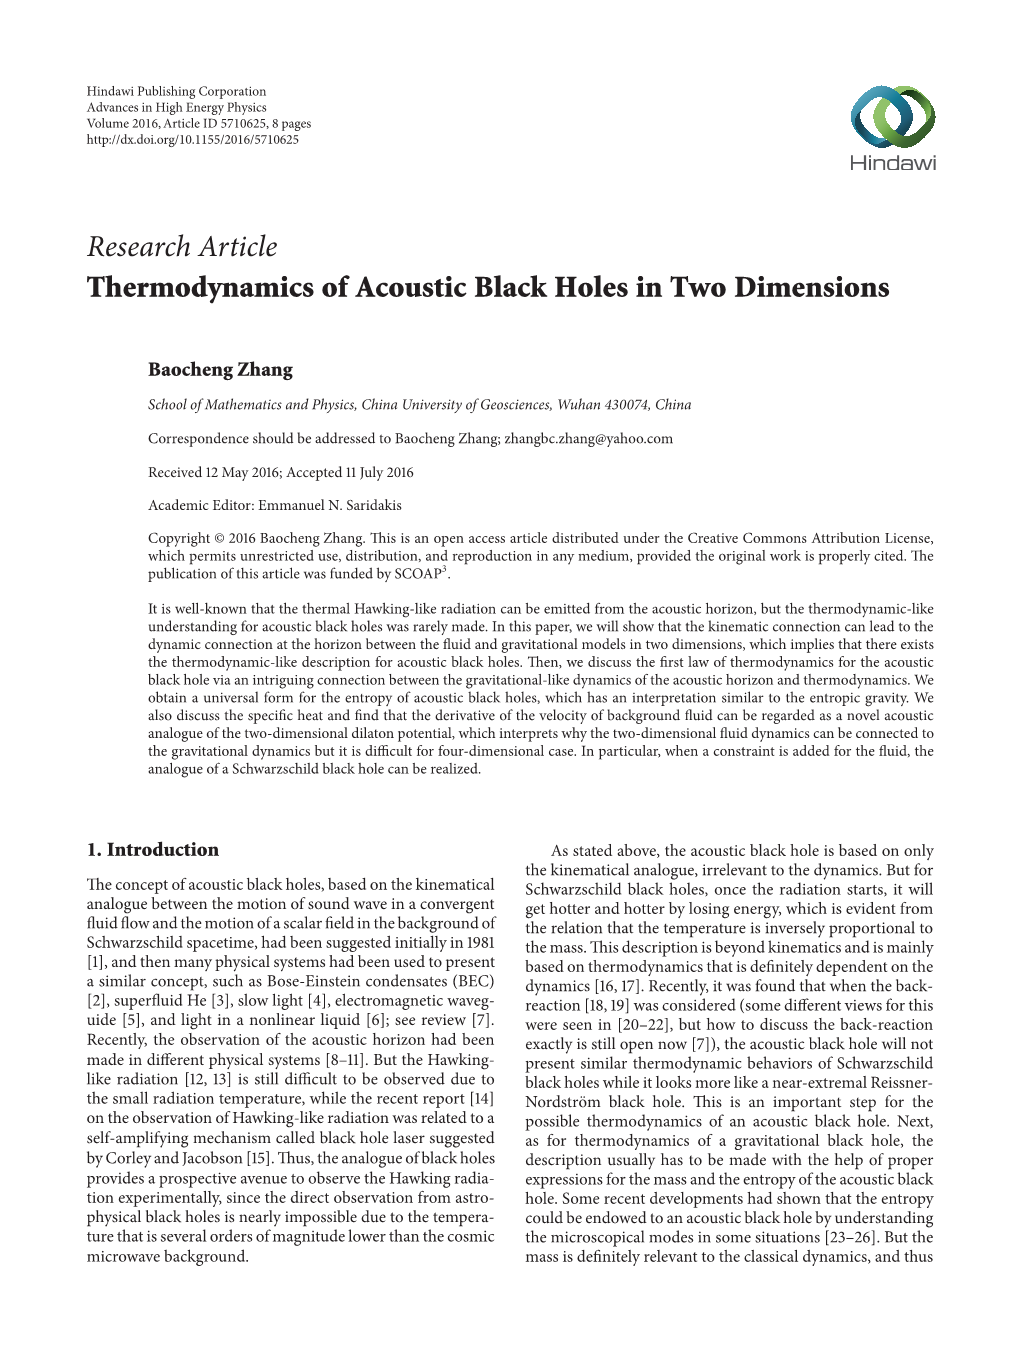 Thermodynamics of Acoustic Black Holes in Two Dimensions